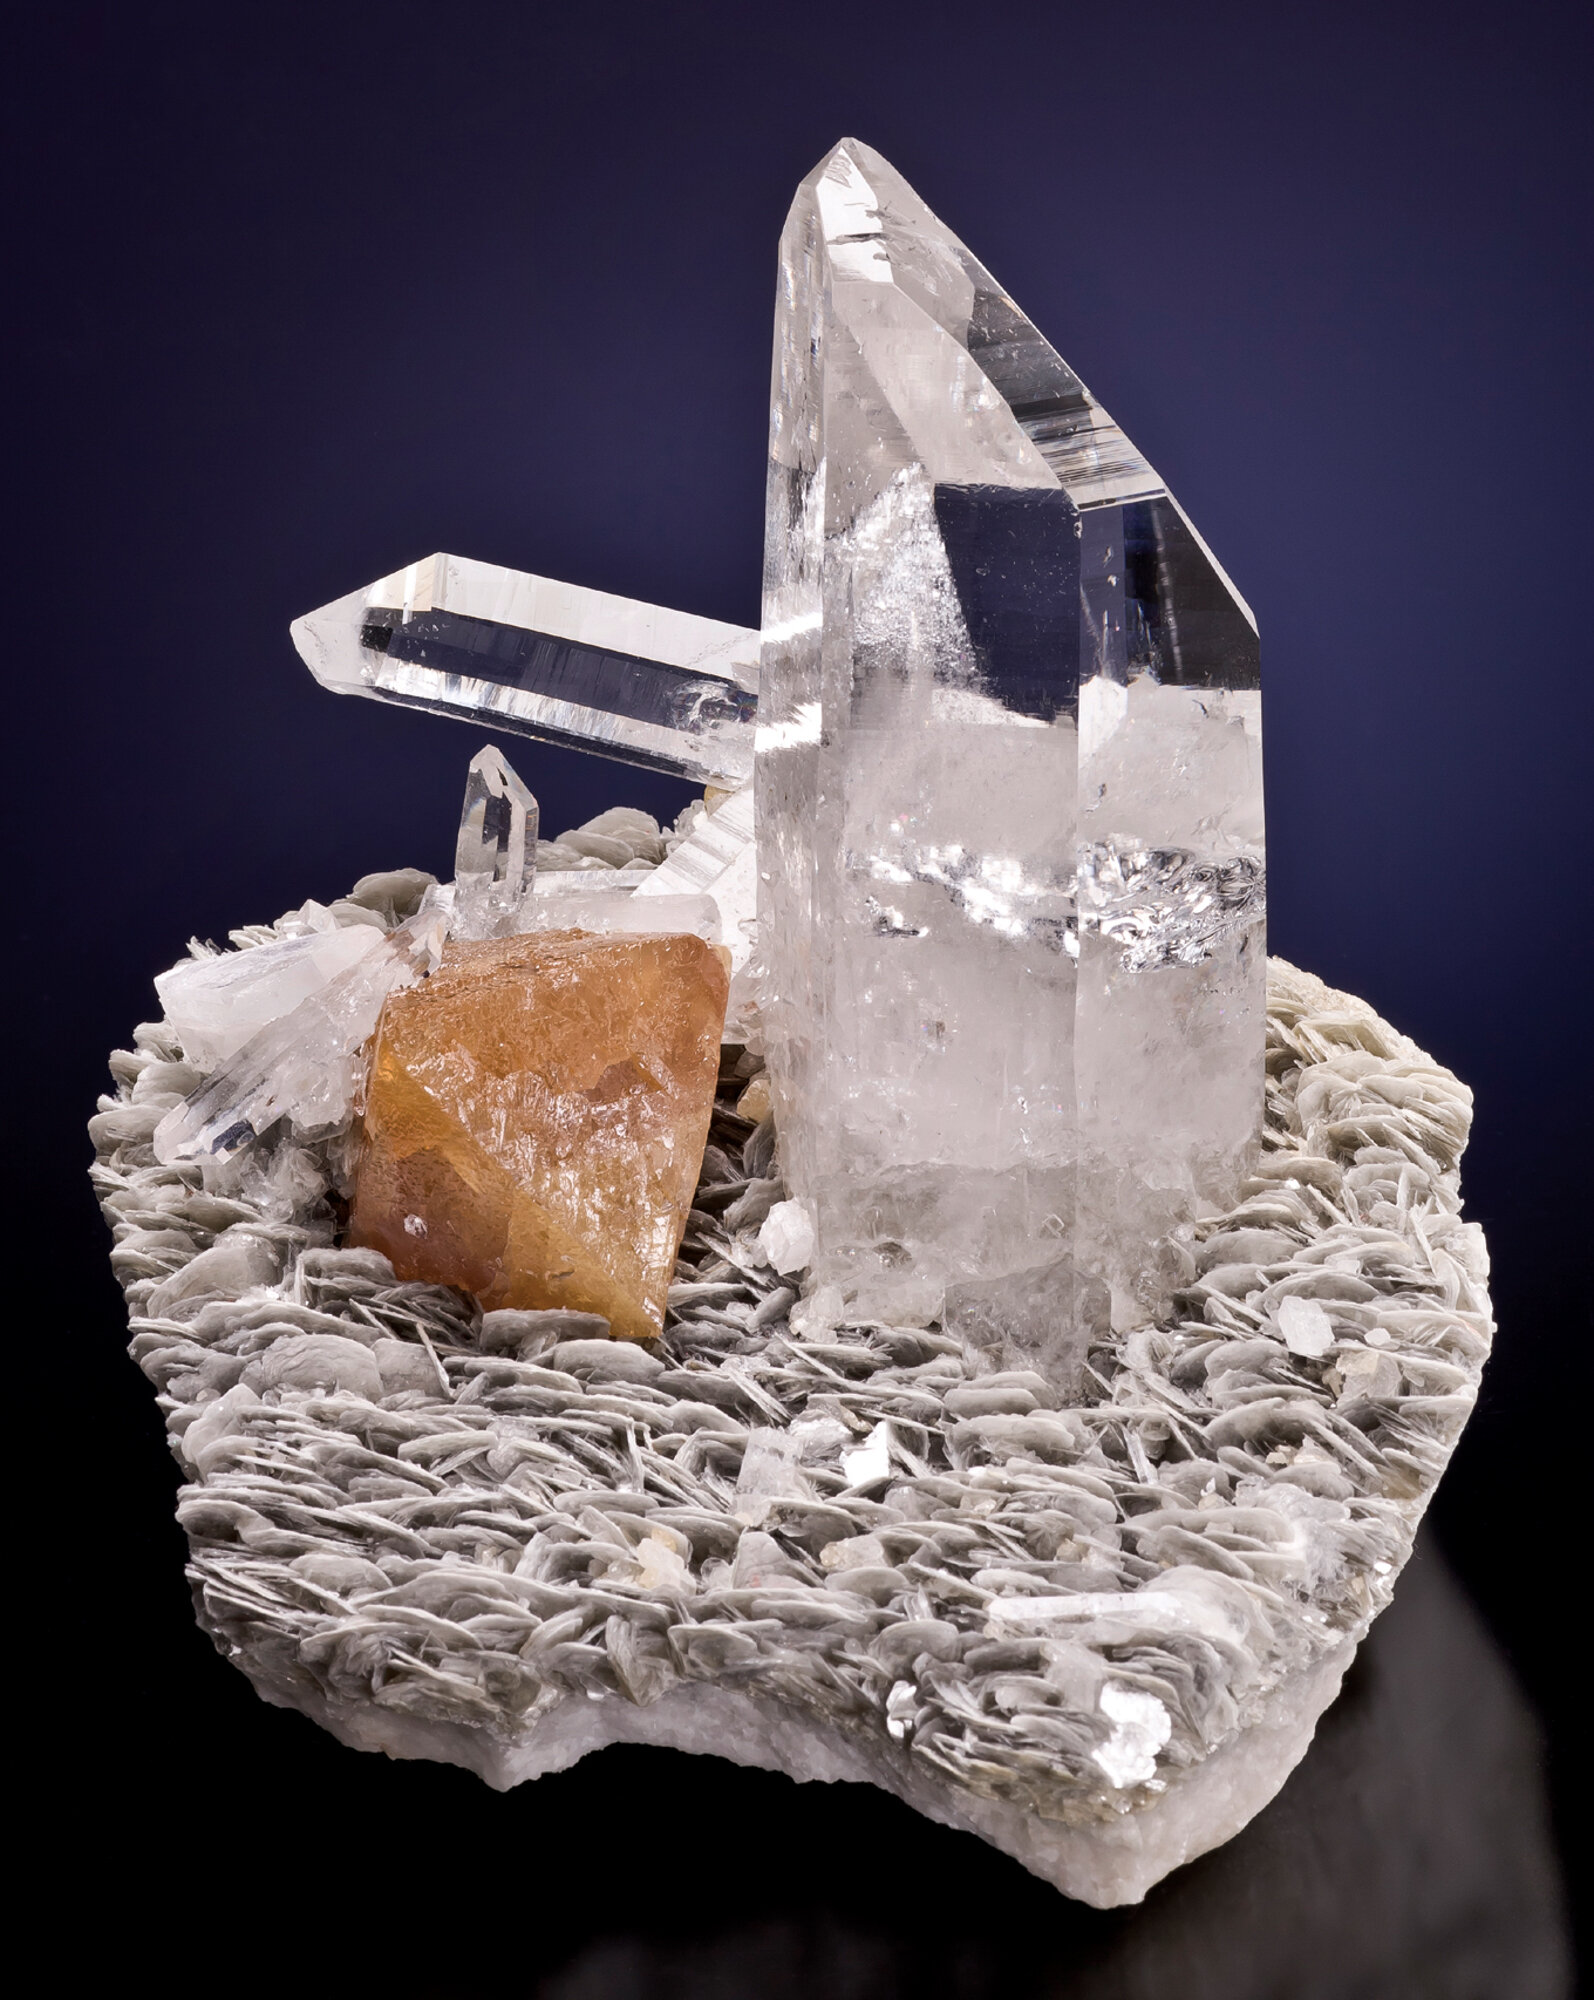  Scheelite with quartz on muscovite, 13 cm, found in the late 1990s; ex Jack Halpern collection, shown in incandescent light, found in 2006; from the Pingwu mine, Huya Township, Mt. Xuebaoding, Pingwu County, Mianyang Prefecture, Sichuan Province, Ch